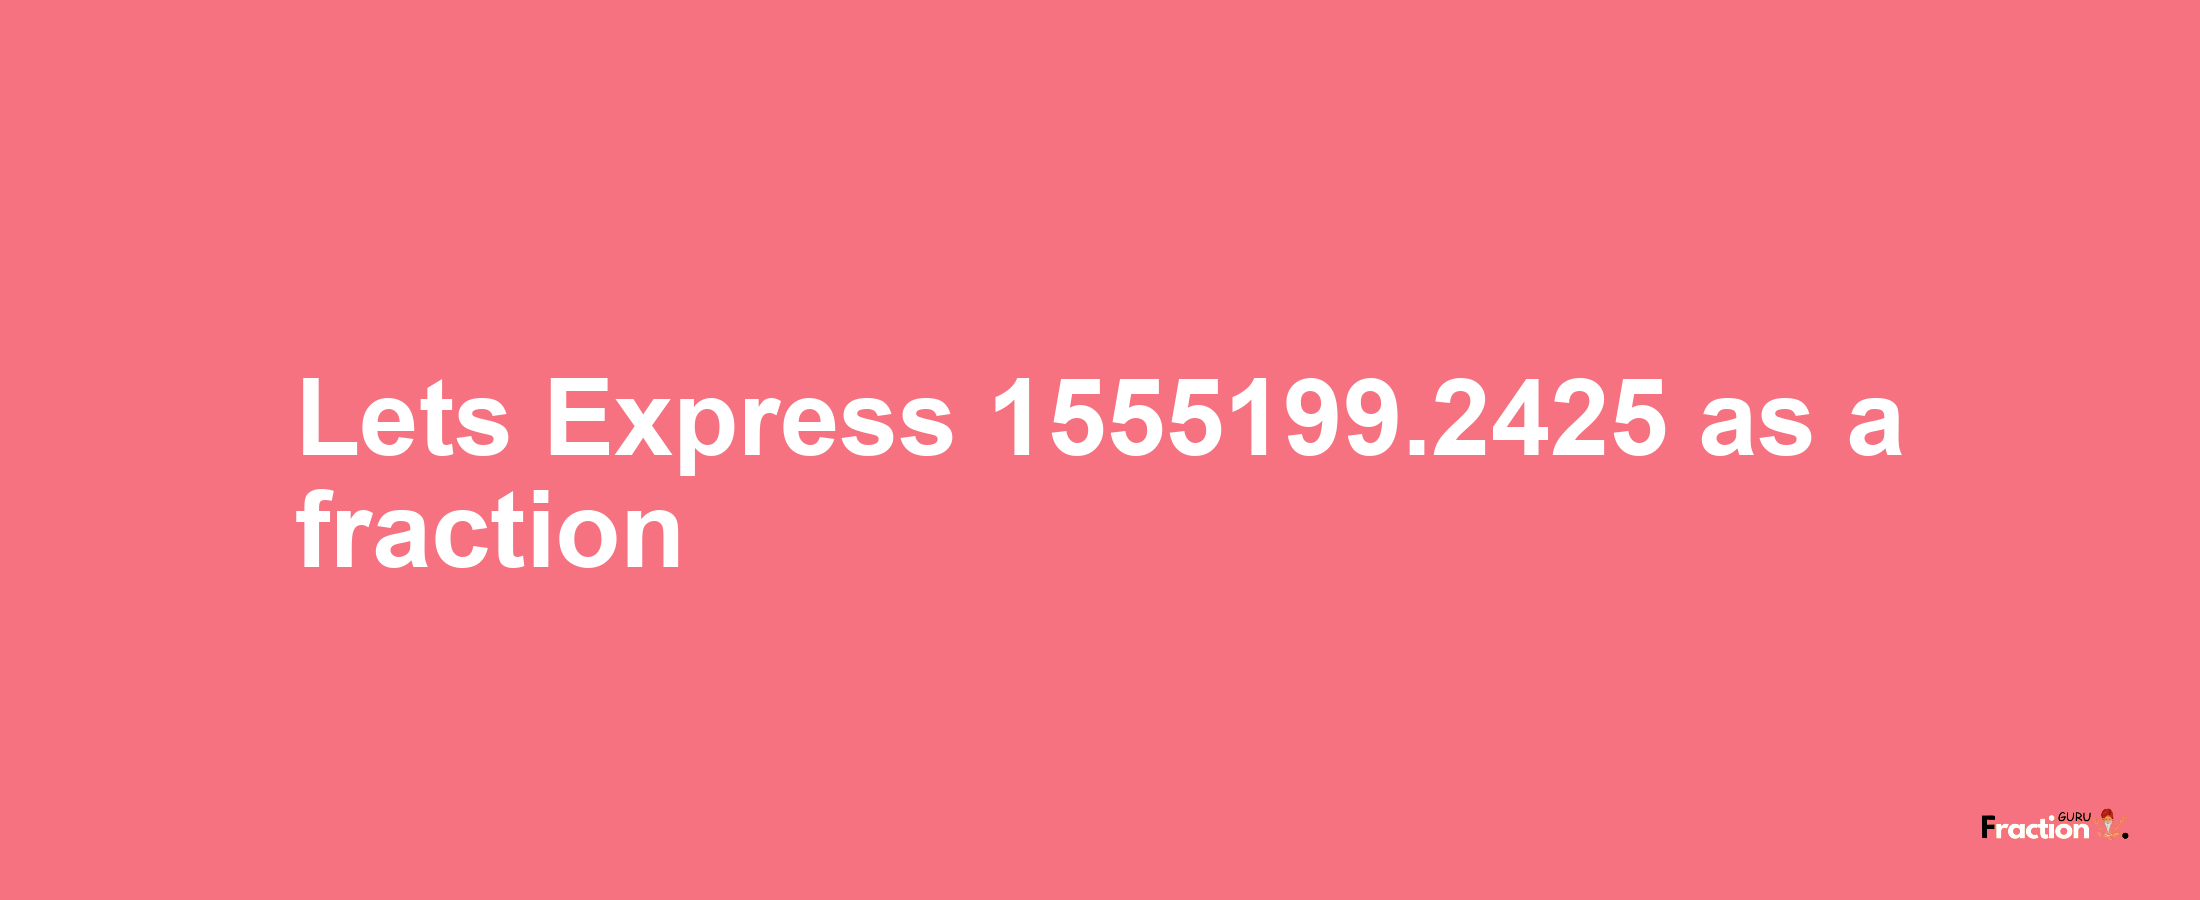 Lets Express 1555199.2425 as afraction